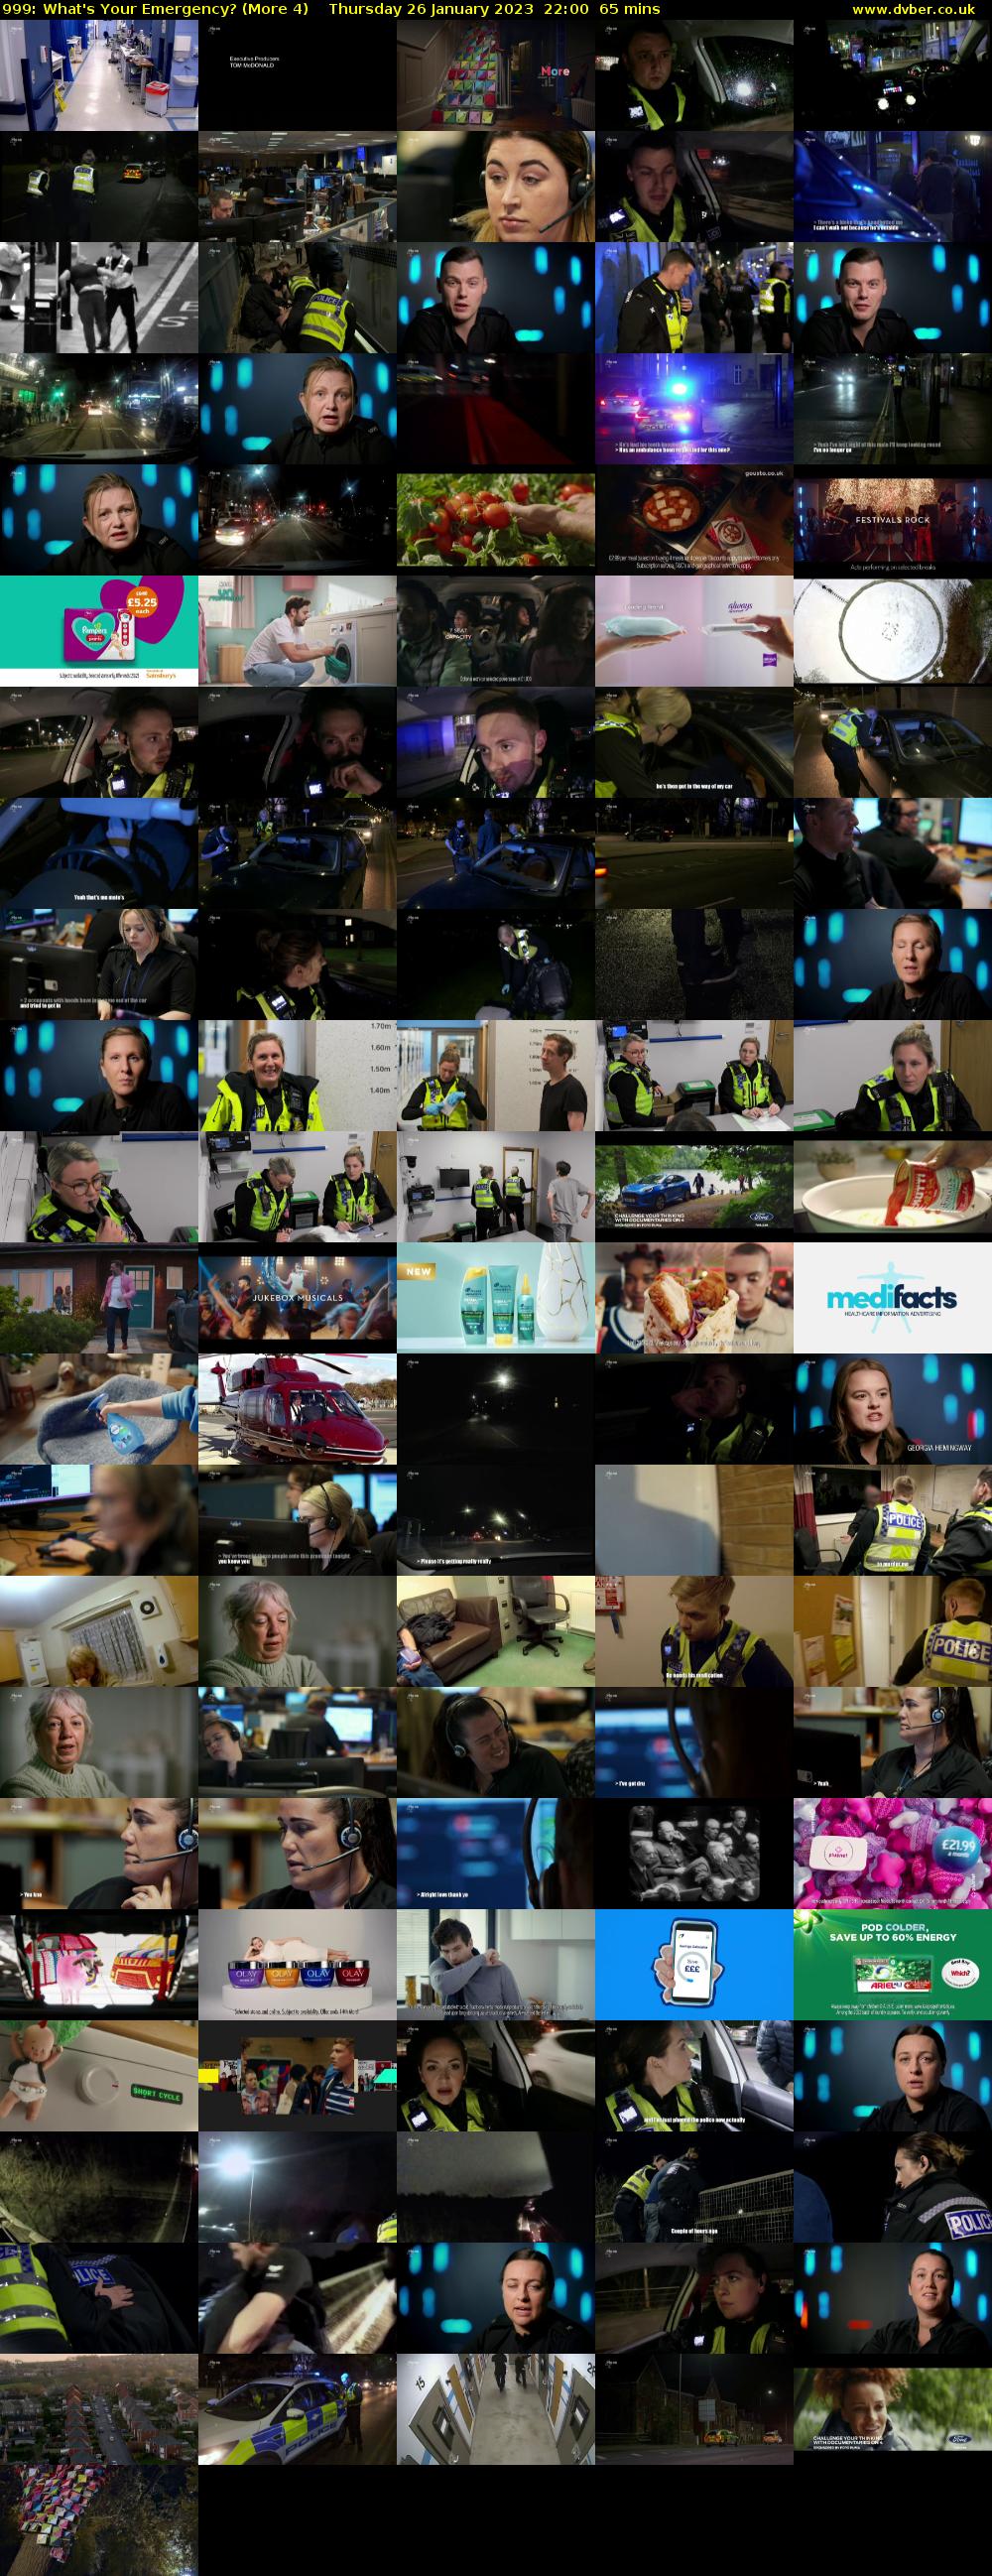 999: What's Your Emergency? (More 4) Thursday 26 January 2023 22:00 - 23:05